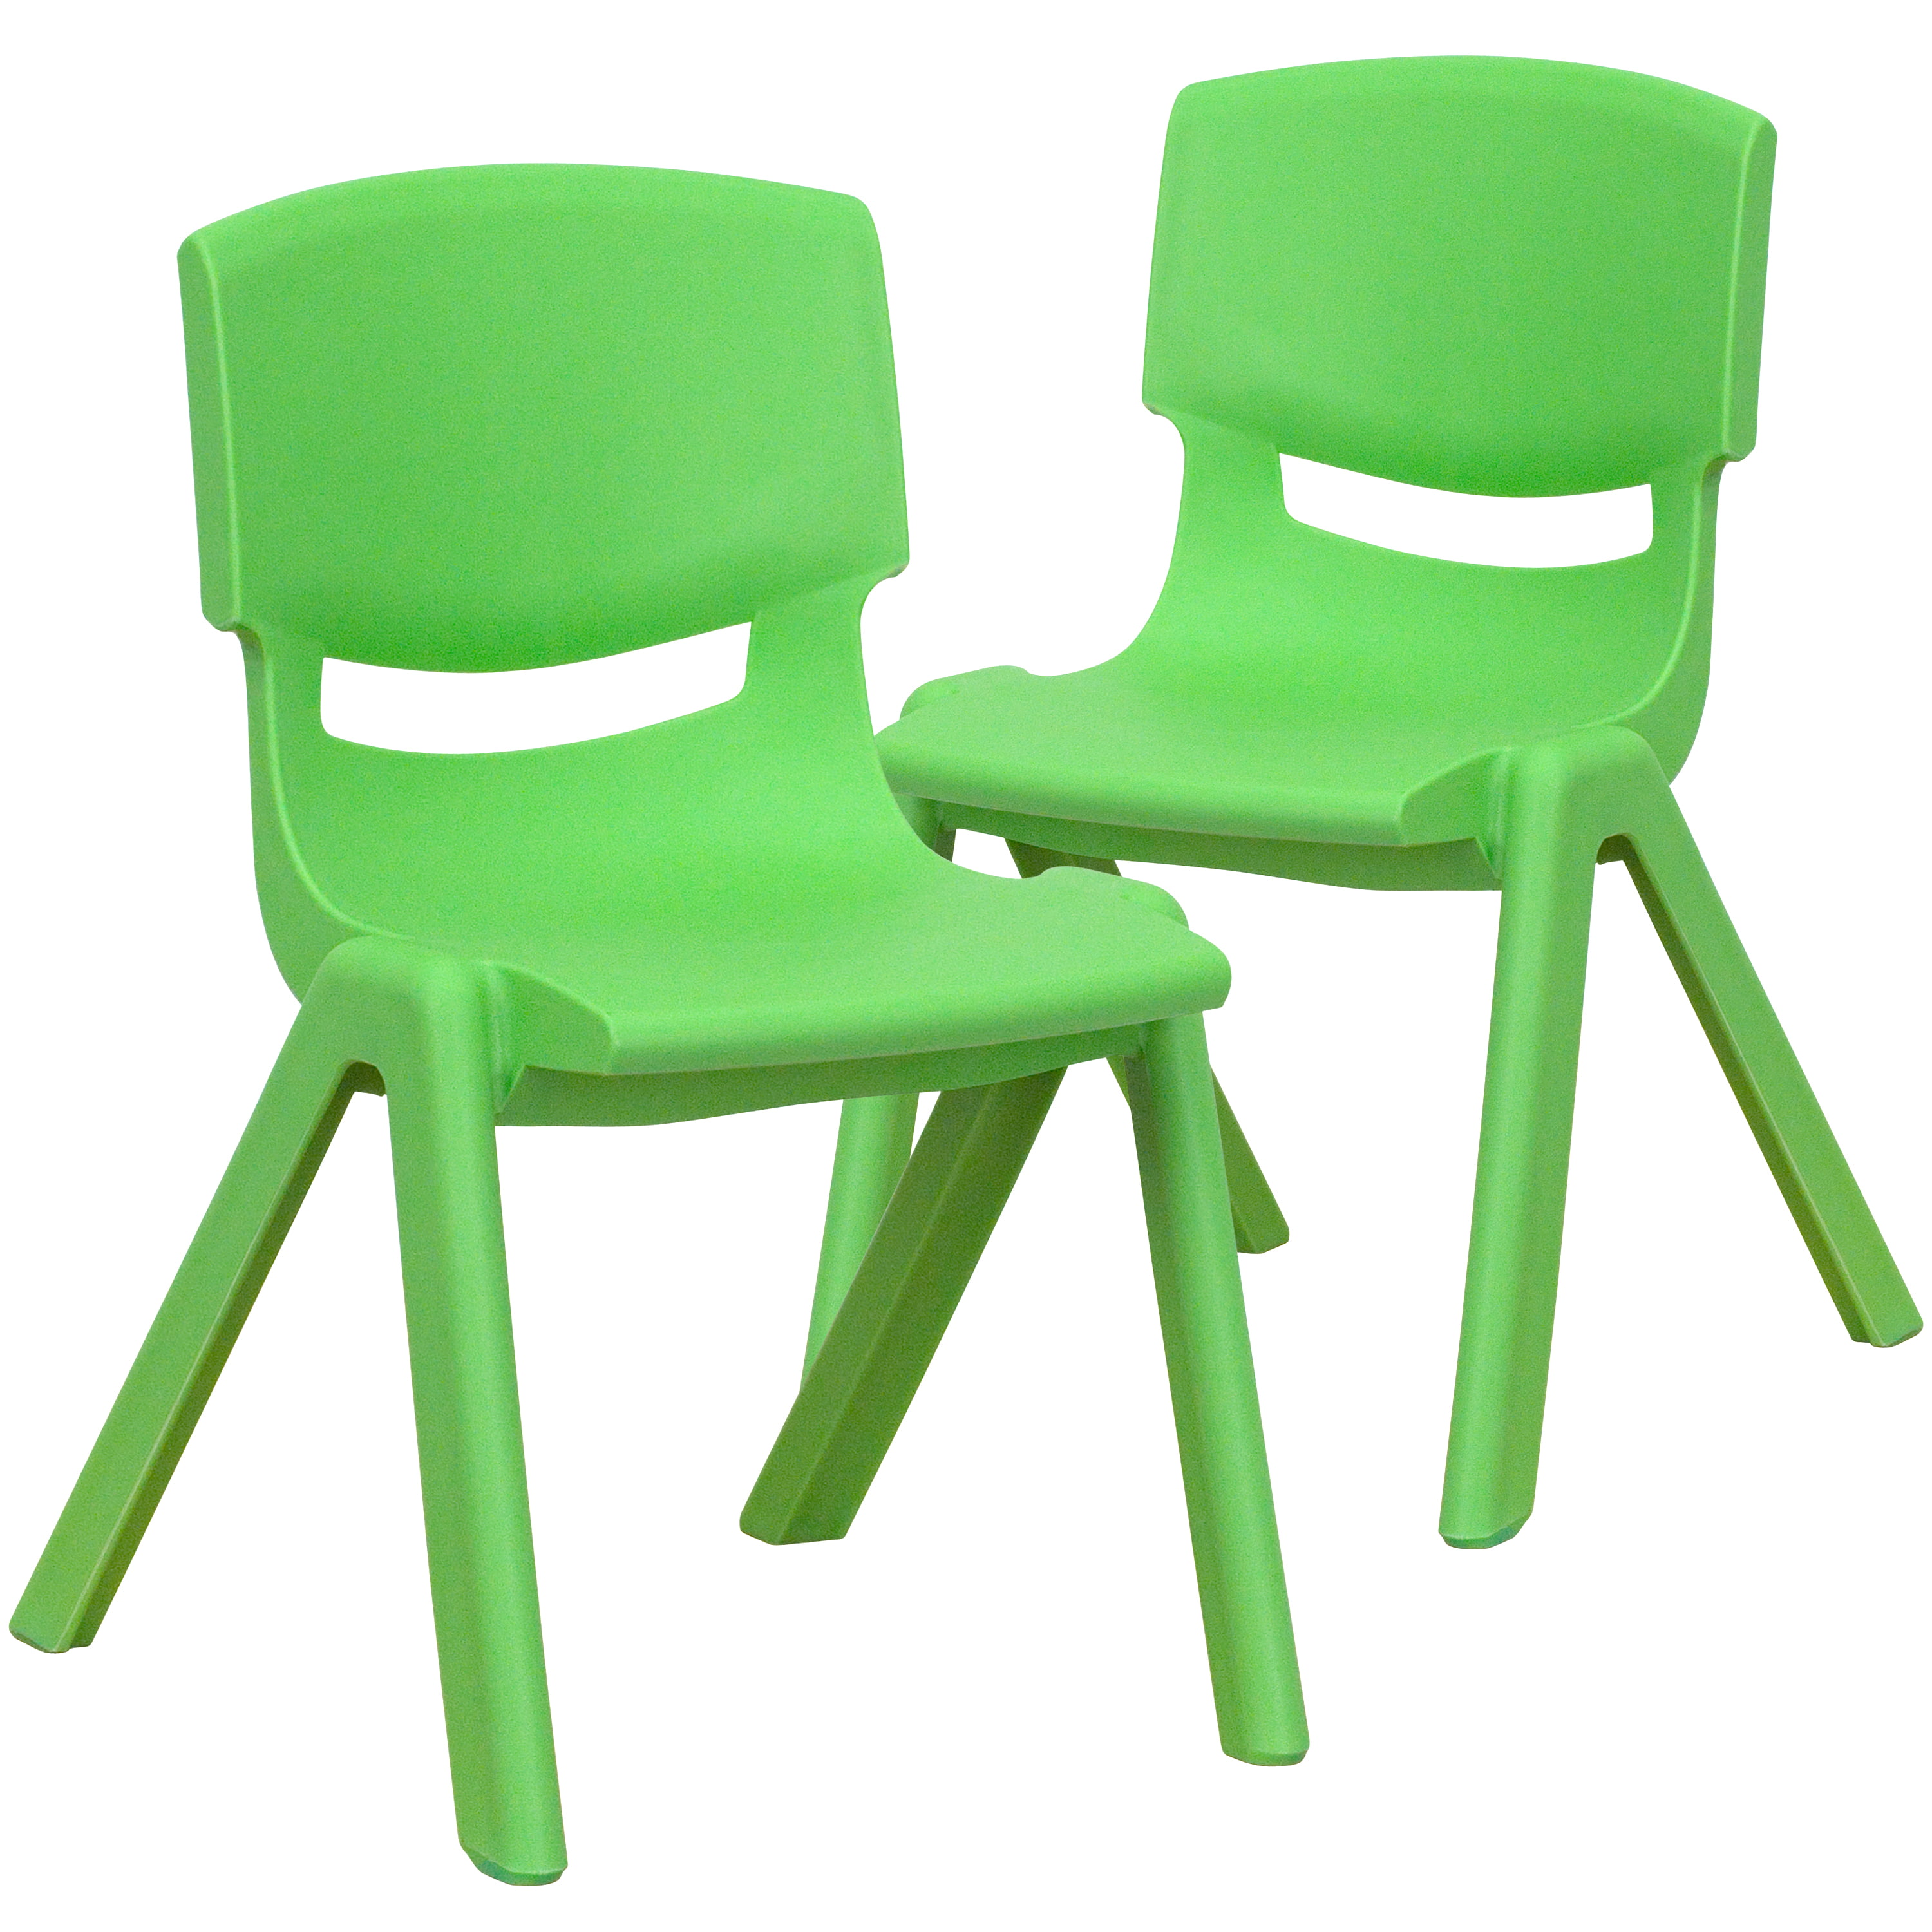 Flash Furniture Whitney 2 Pack Green Plastic Stackable School Chair with 12" Seat Height - image 1 of 13